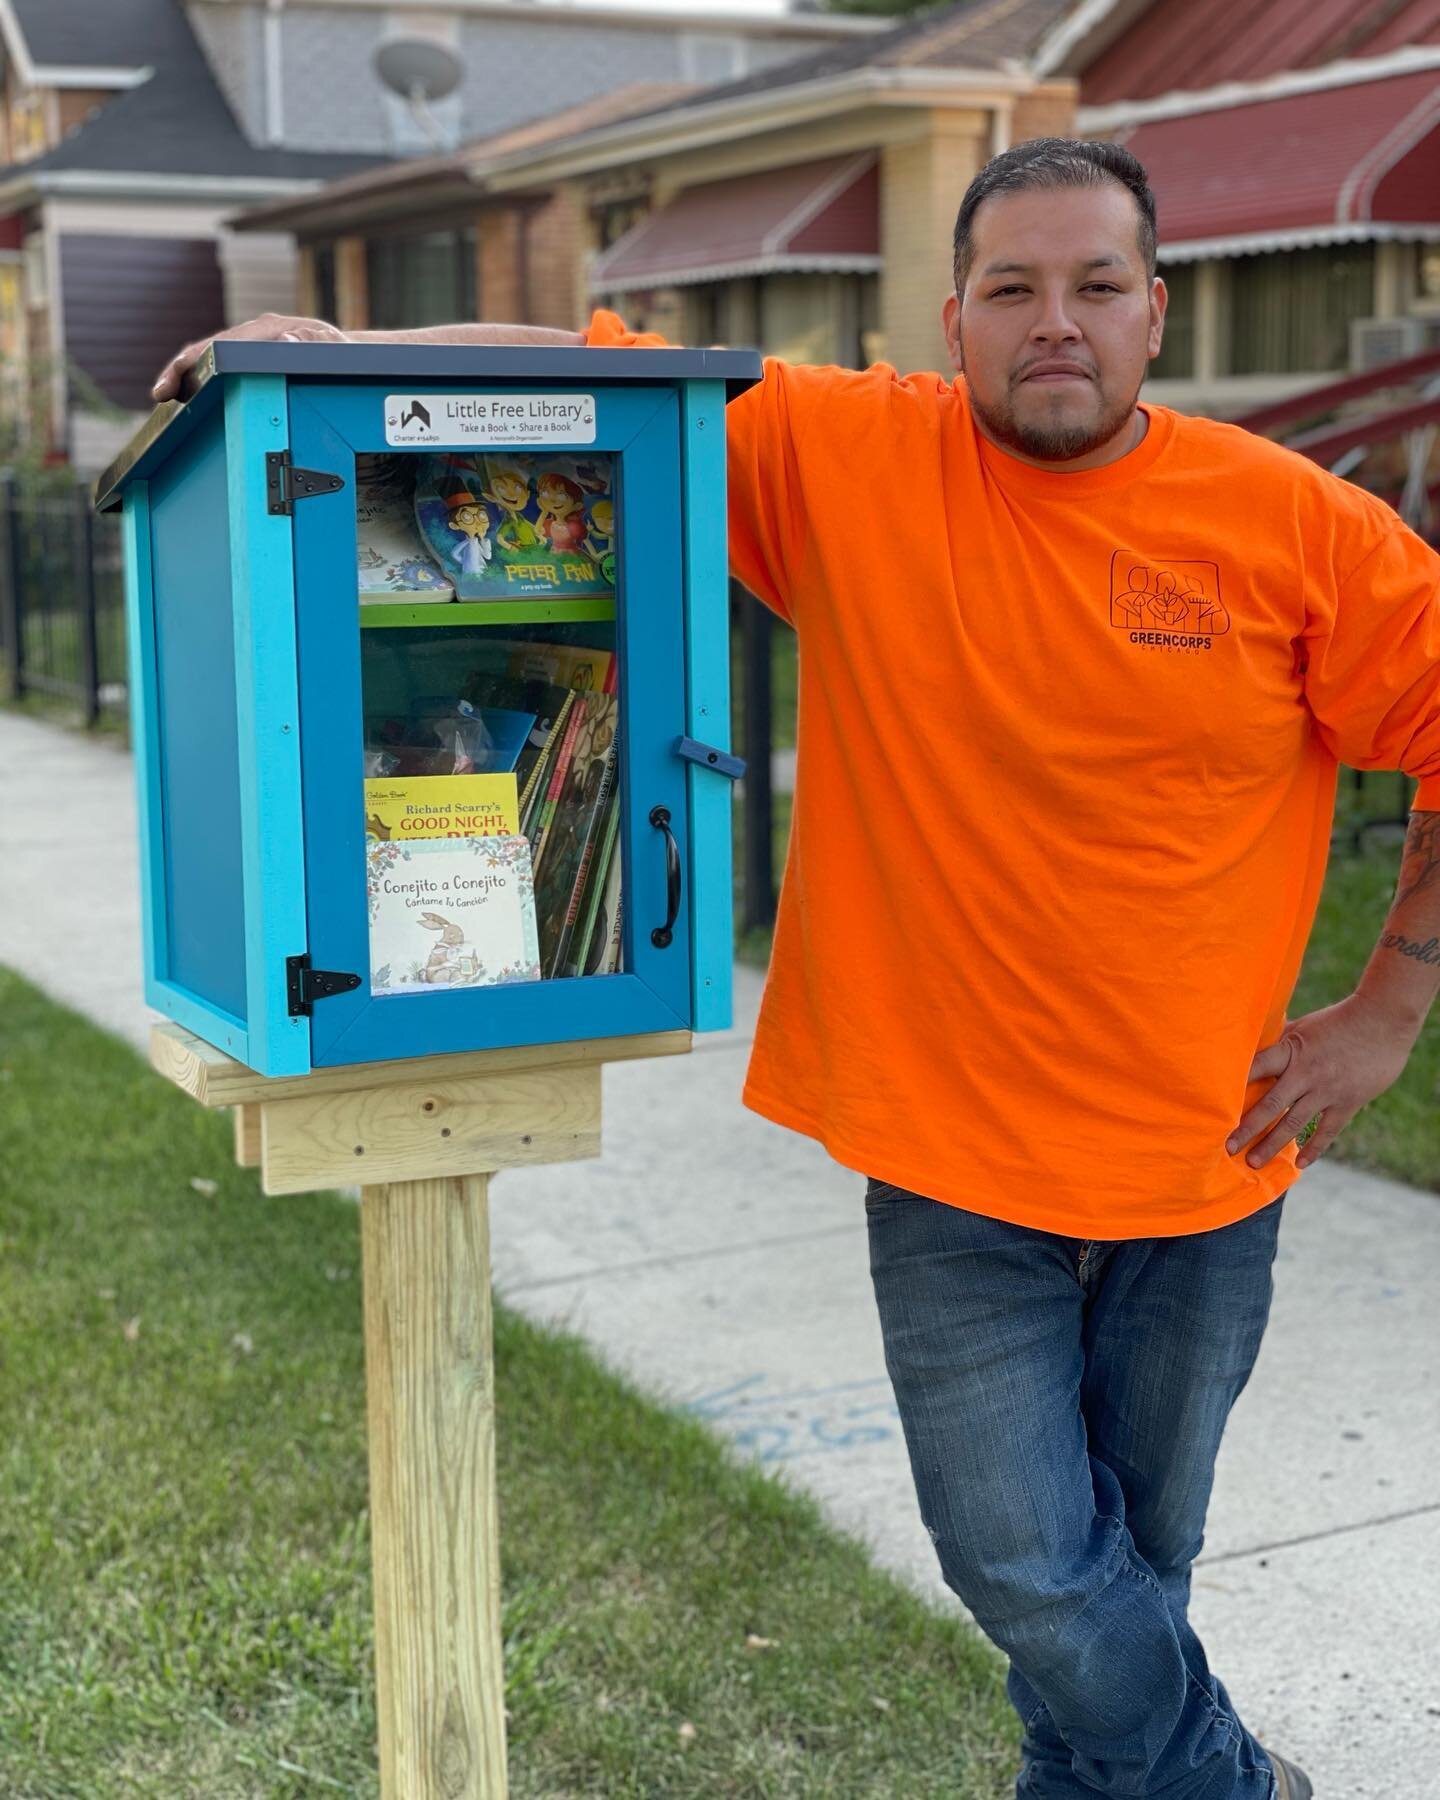 What a great way to close out Neighbor to Neighbor&rsquo;s 2022 install season! Today I met up with my friend Edgar and we installed this blue cutie, the 4th little library we have partnered on together&hellip;
.
Edgar always adds beautiful trees, fl